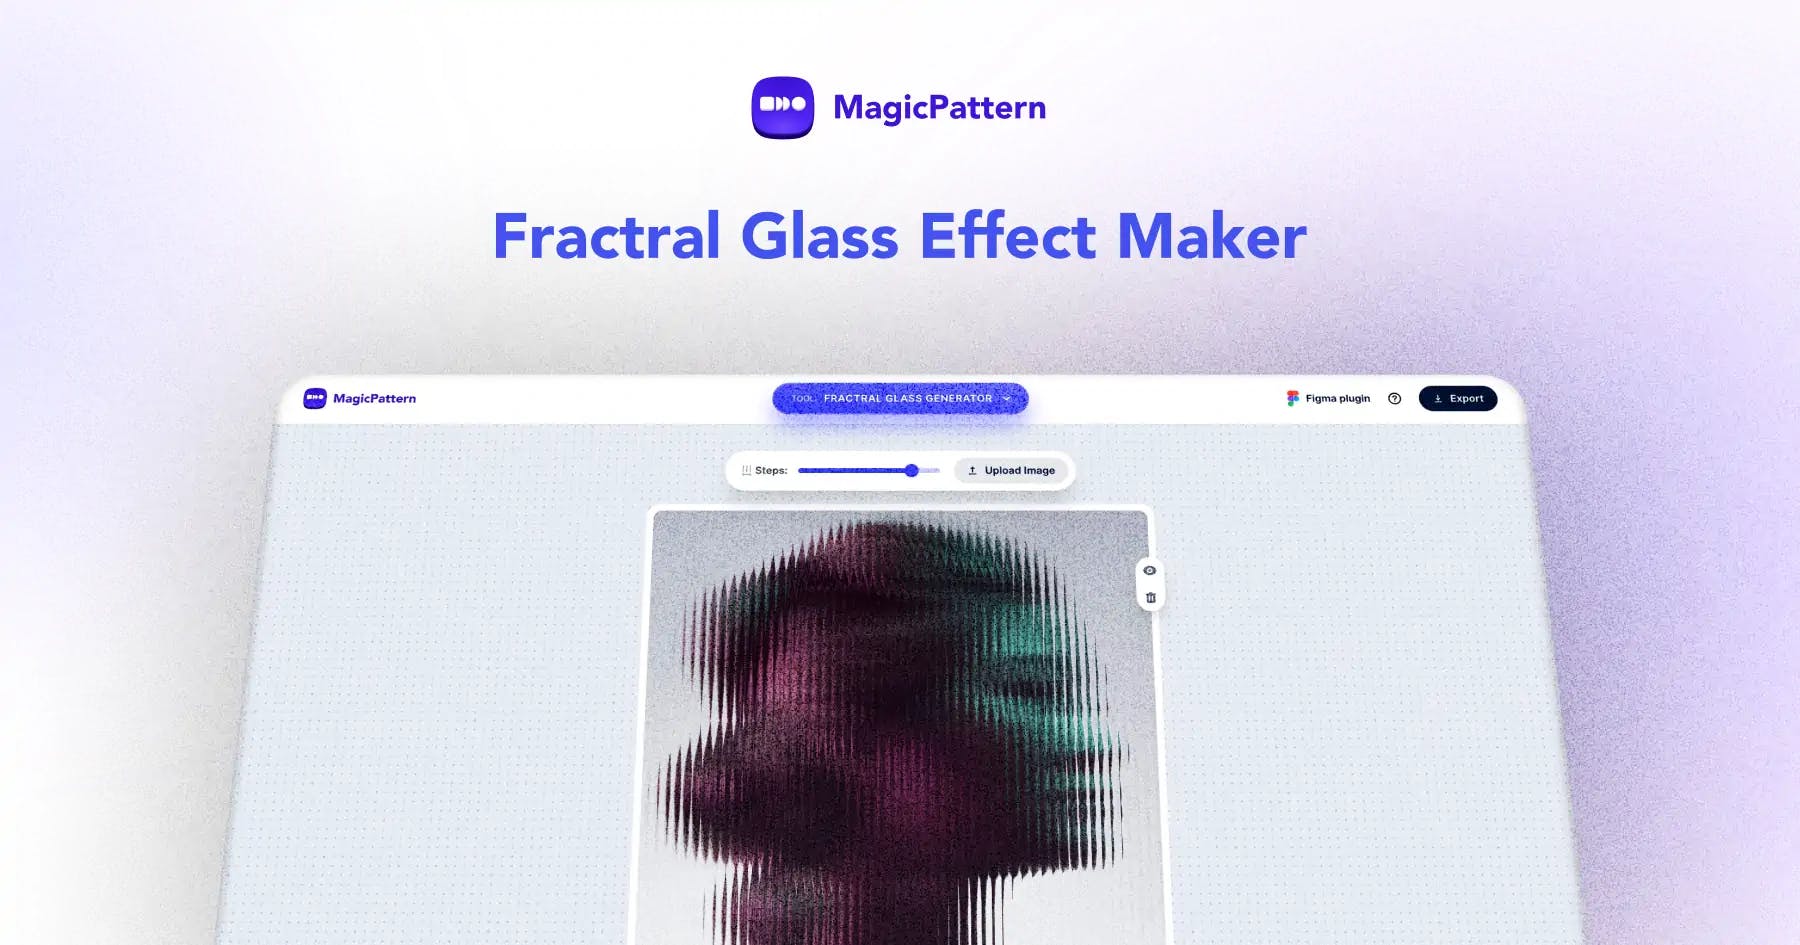 Fractal Glass Effect Generator – By the MagicPattern design toolbox